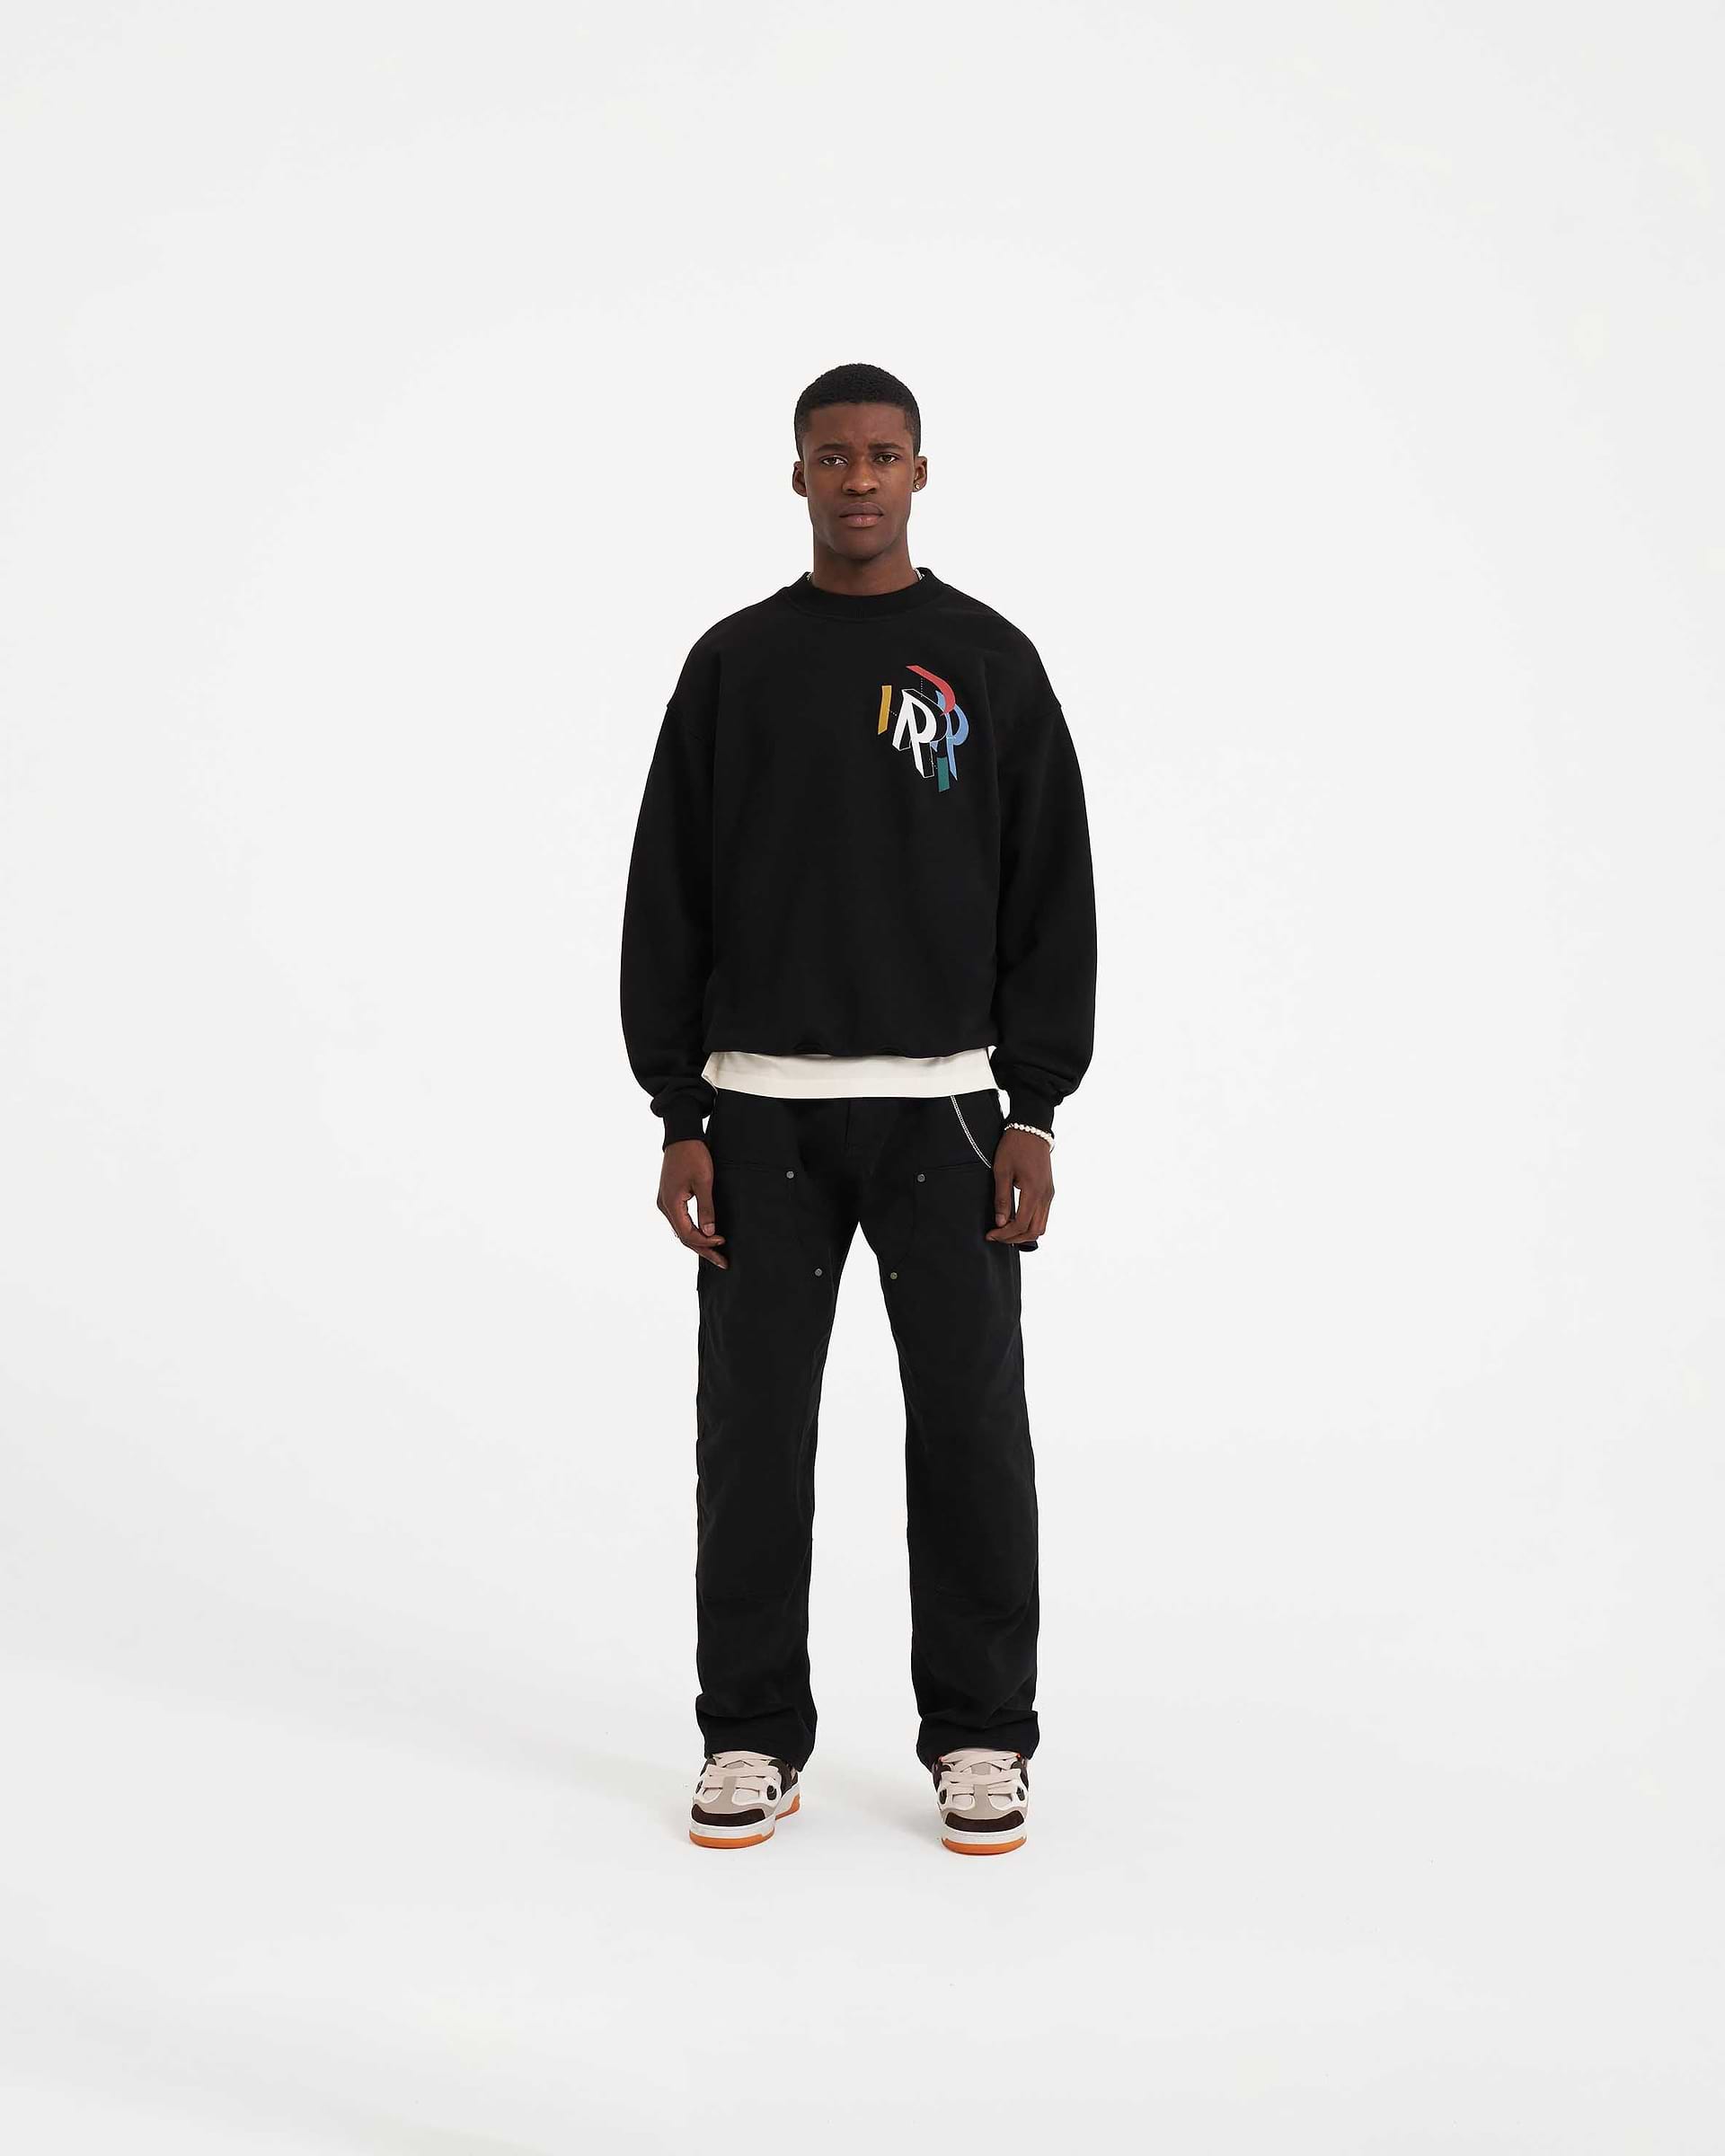 CLO Initial Black Assembly Sweater | | REPRESENT